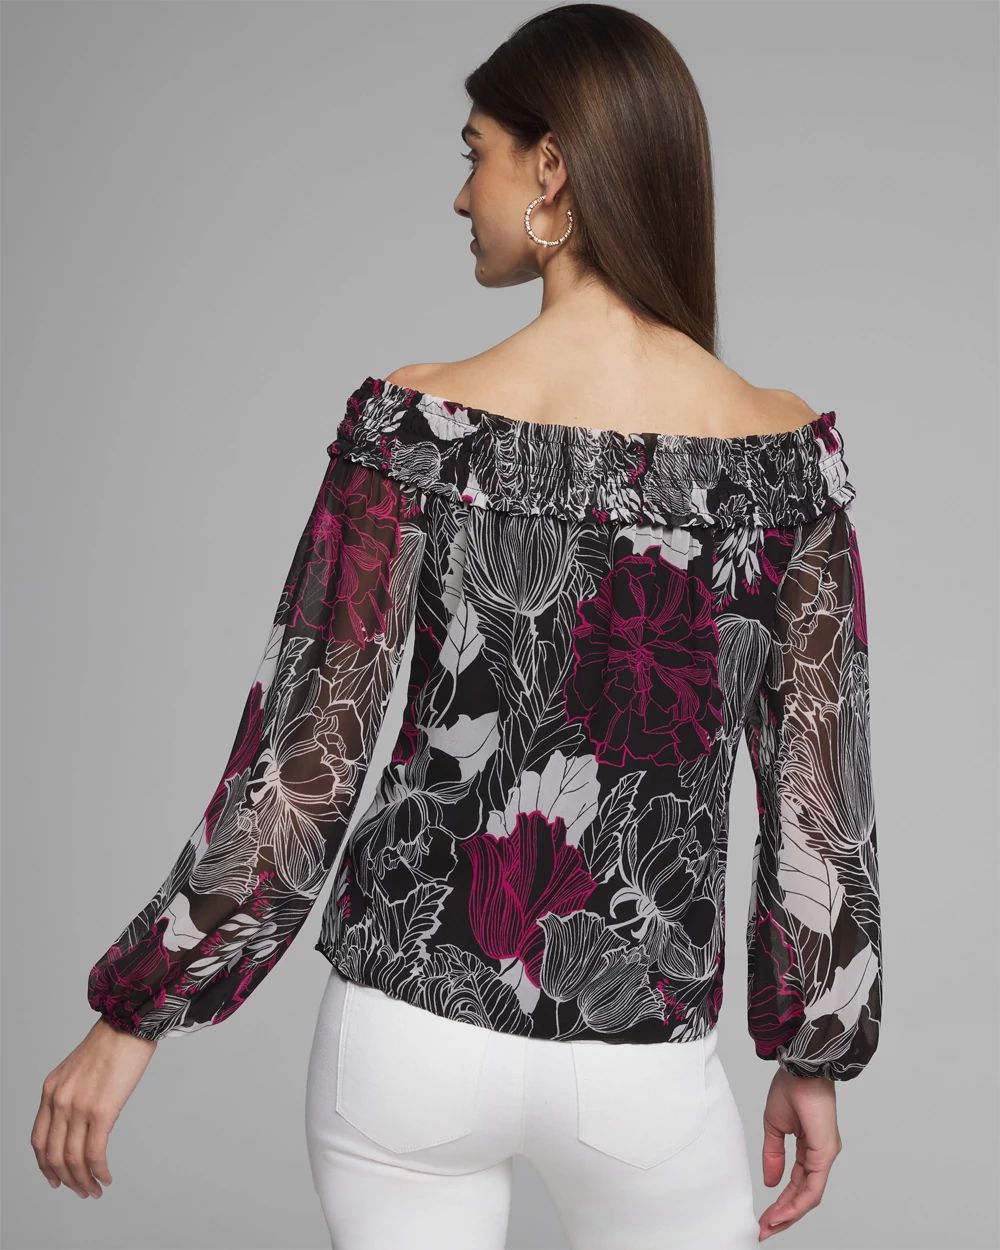 Outlet WHBM Off-The-Shoulder Chiffon Blouse